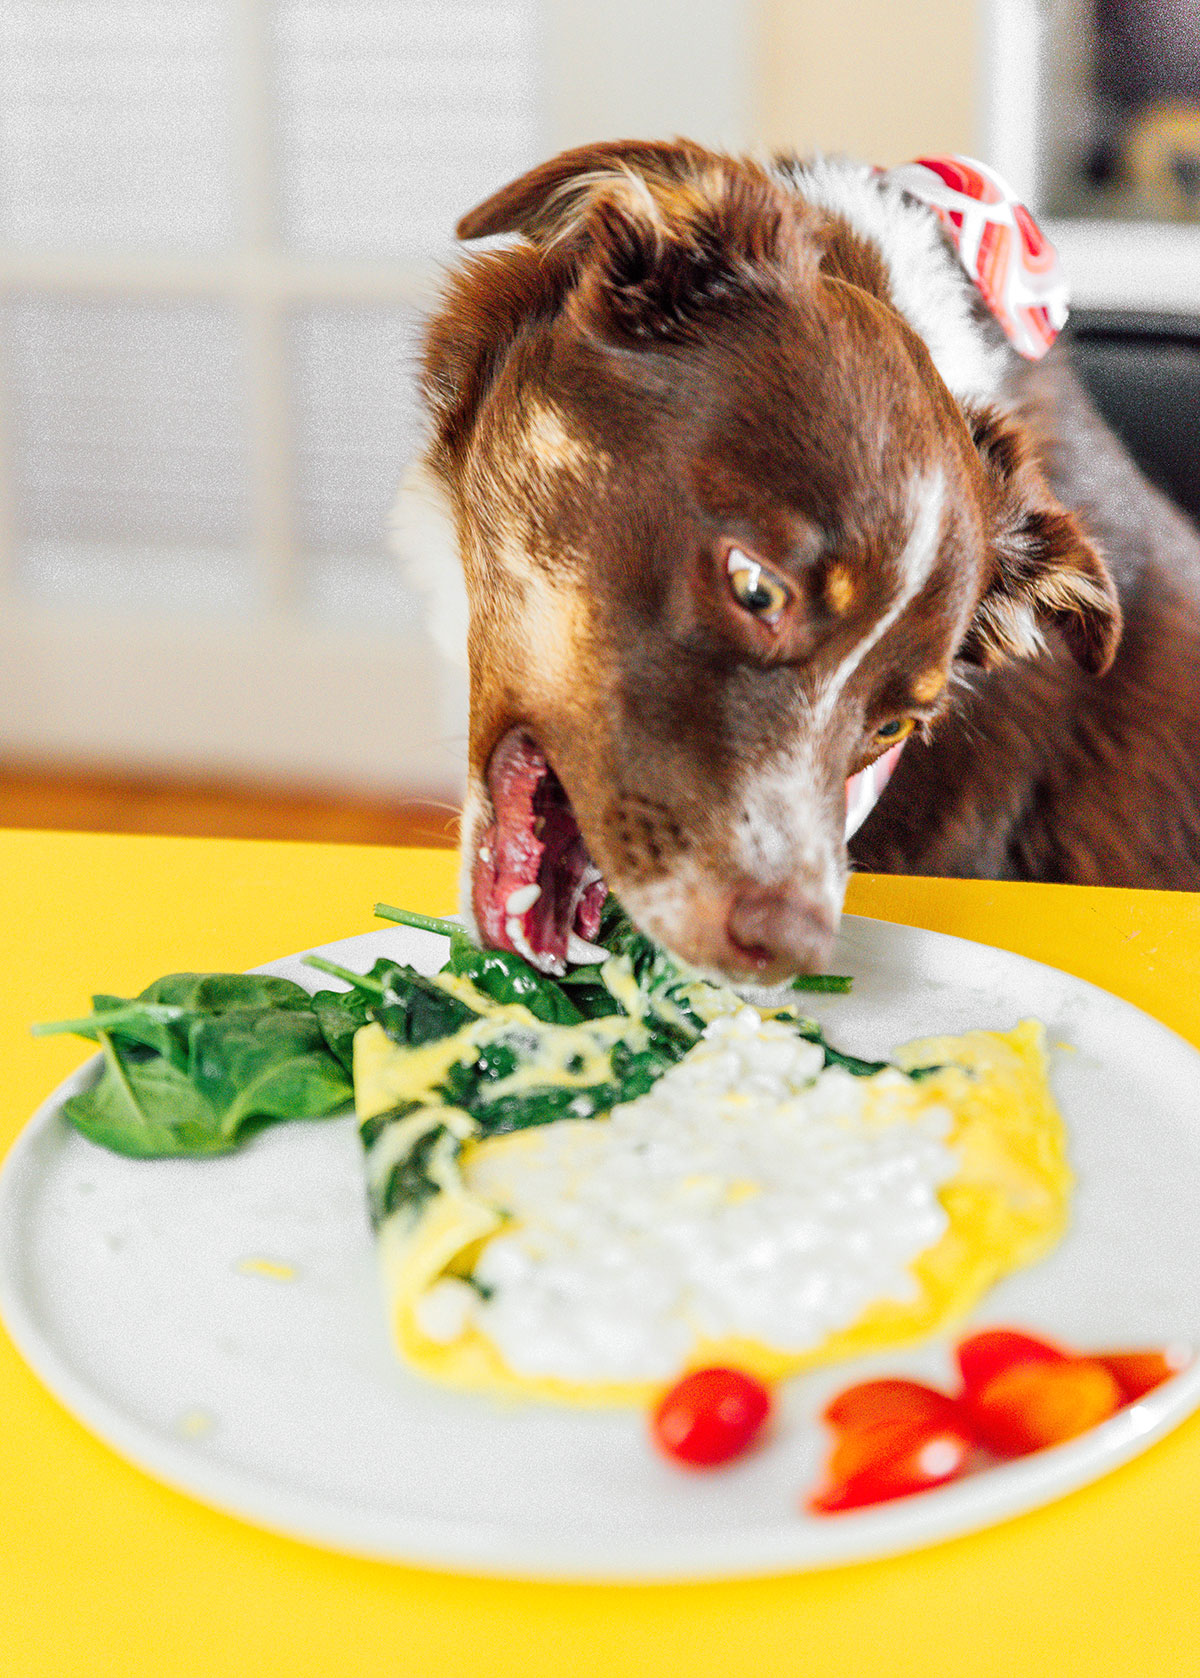 A brown dog eating a cottage cheese omelette with spinach on a plate with cherry tomatoes